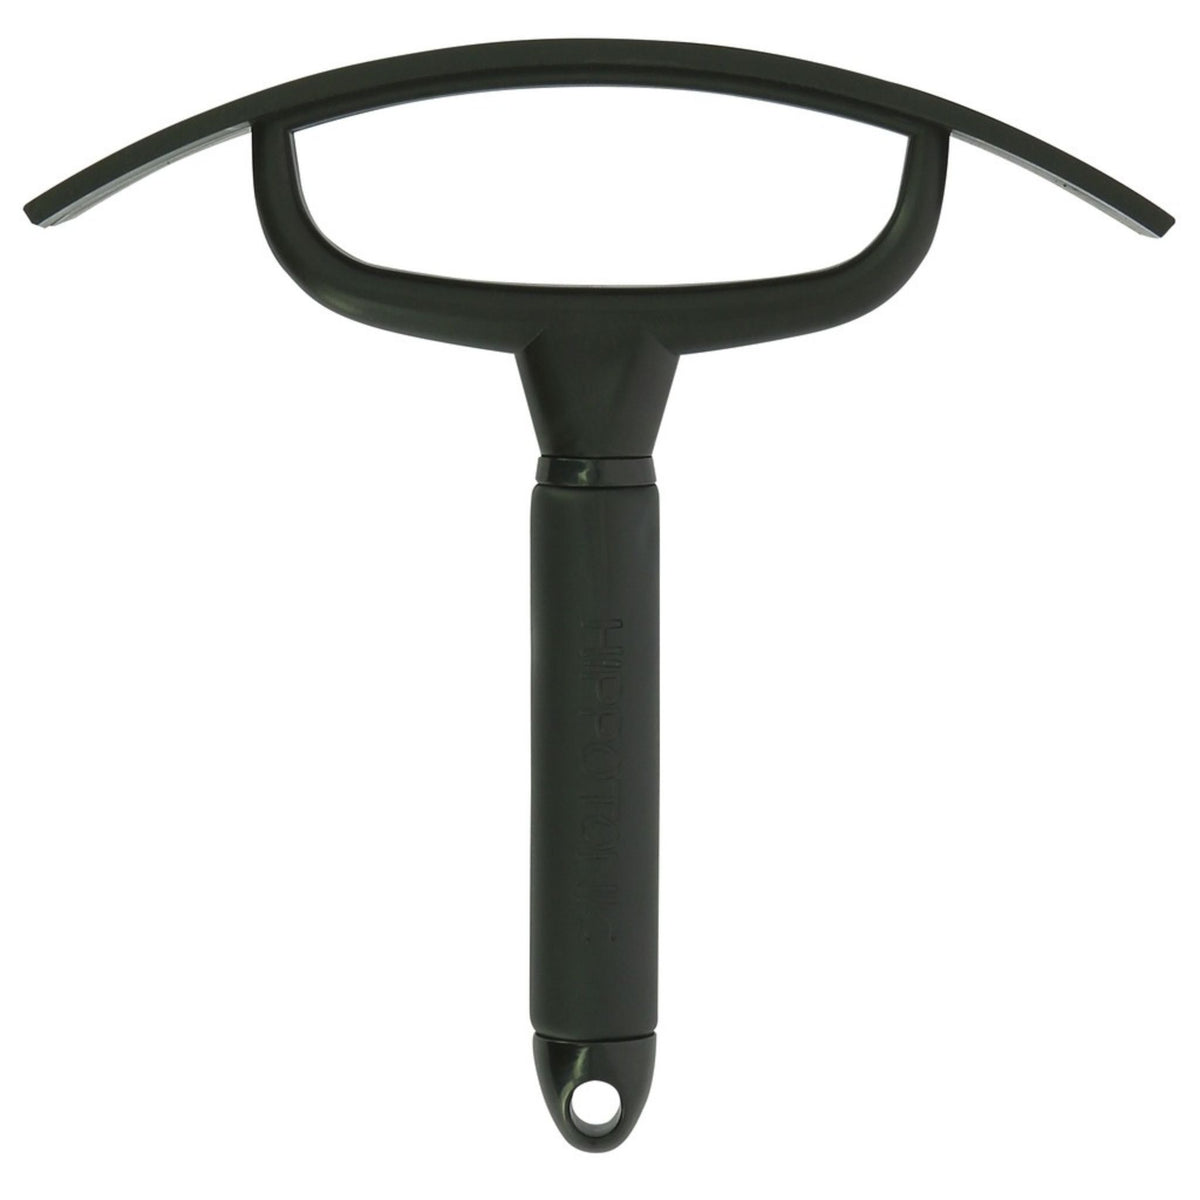 Black sweat scraper with a black leather handle indented with “Hippotonic”.